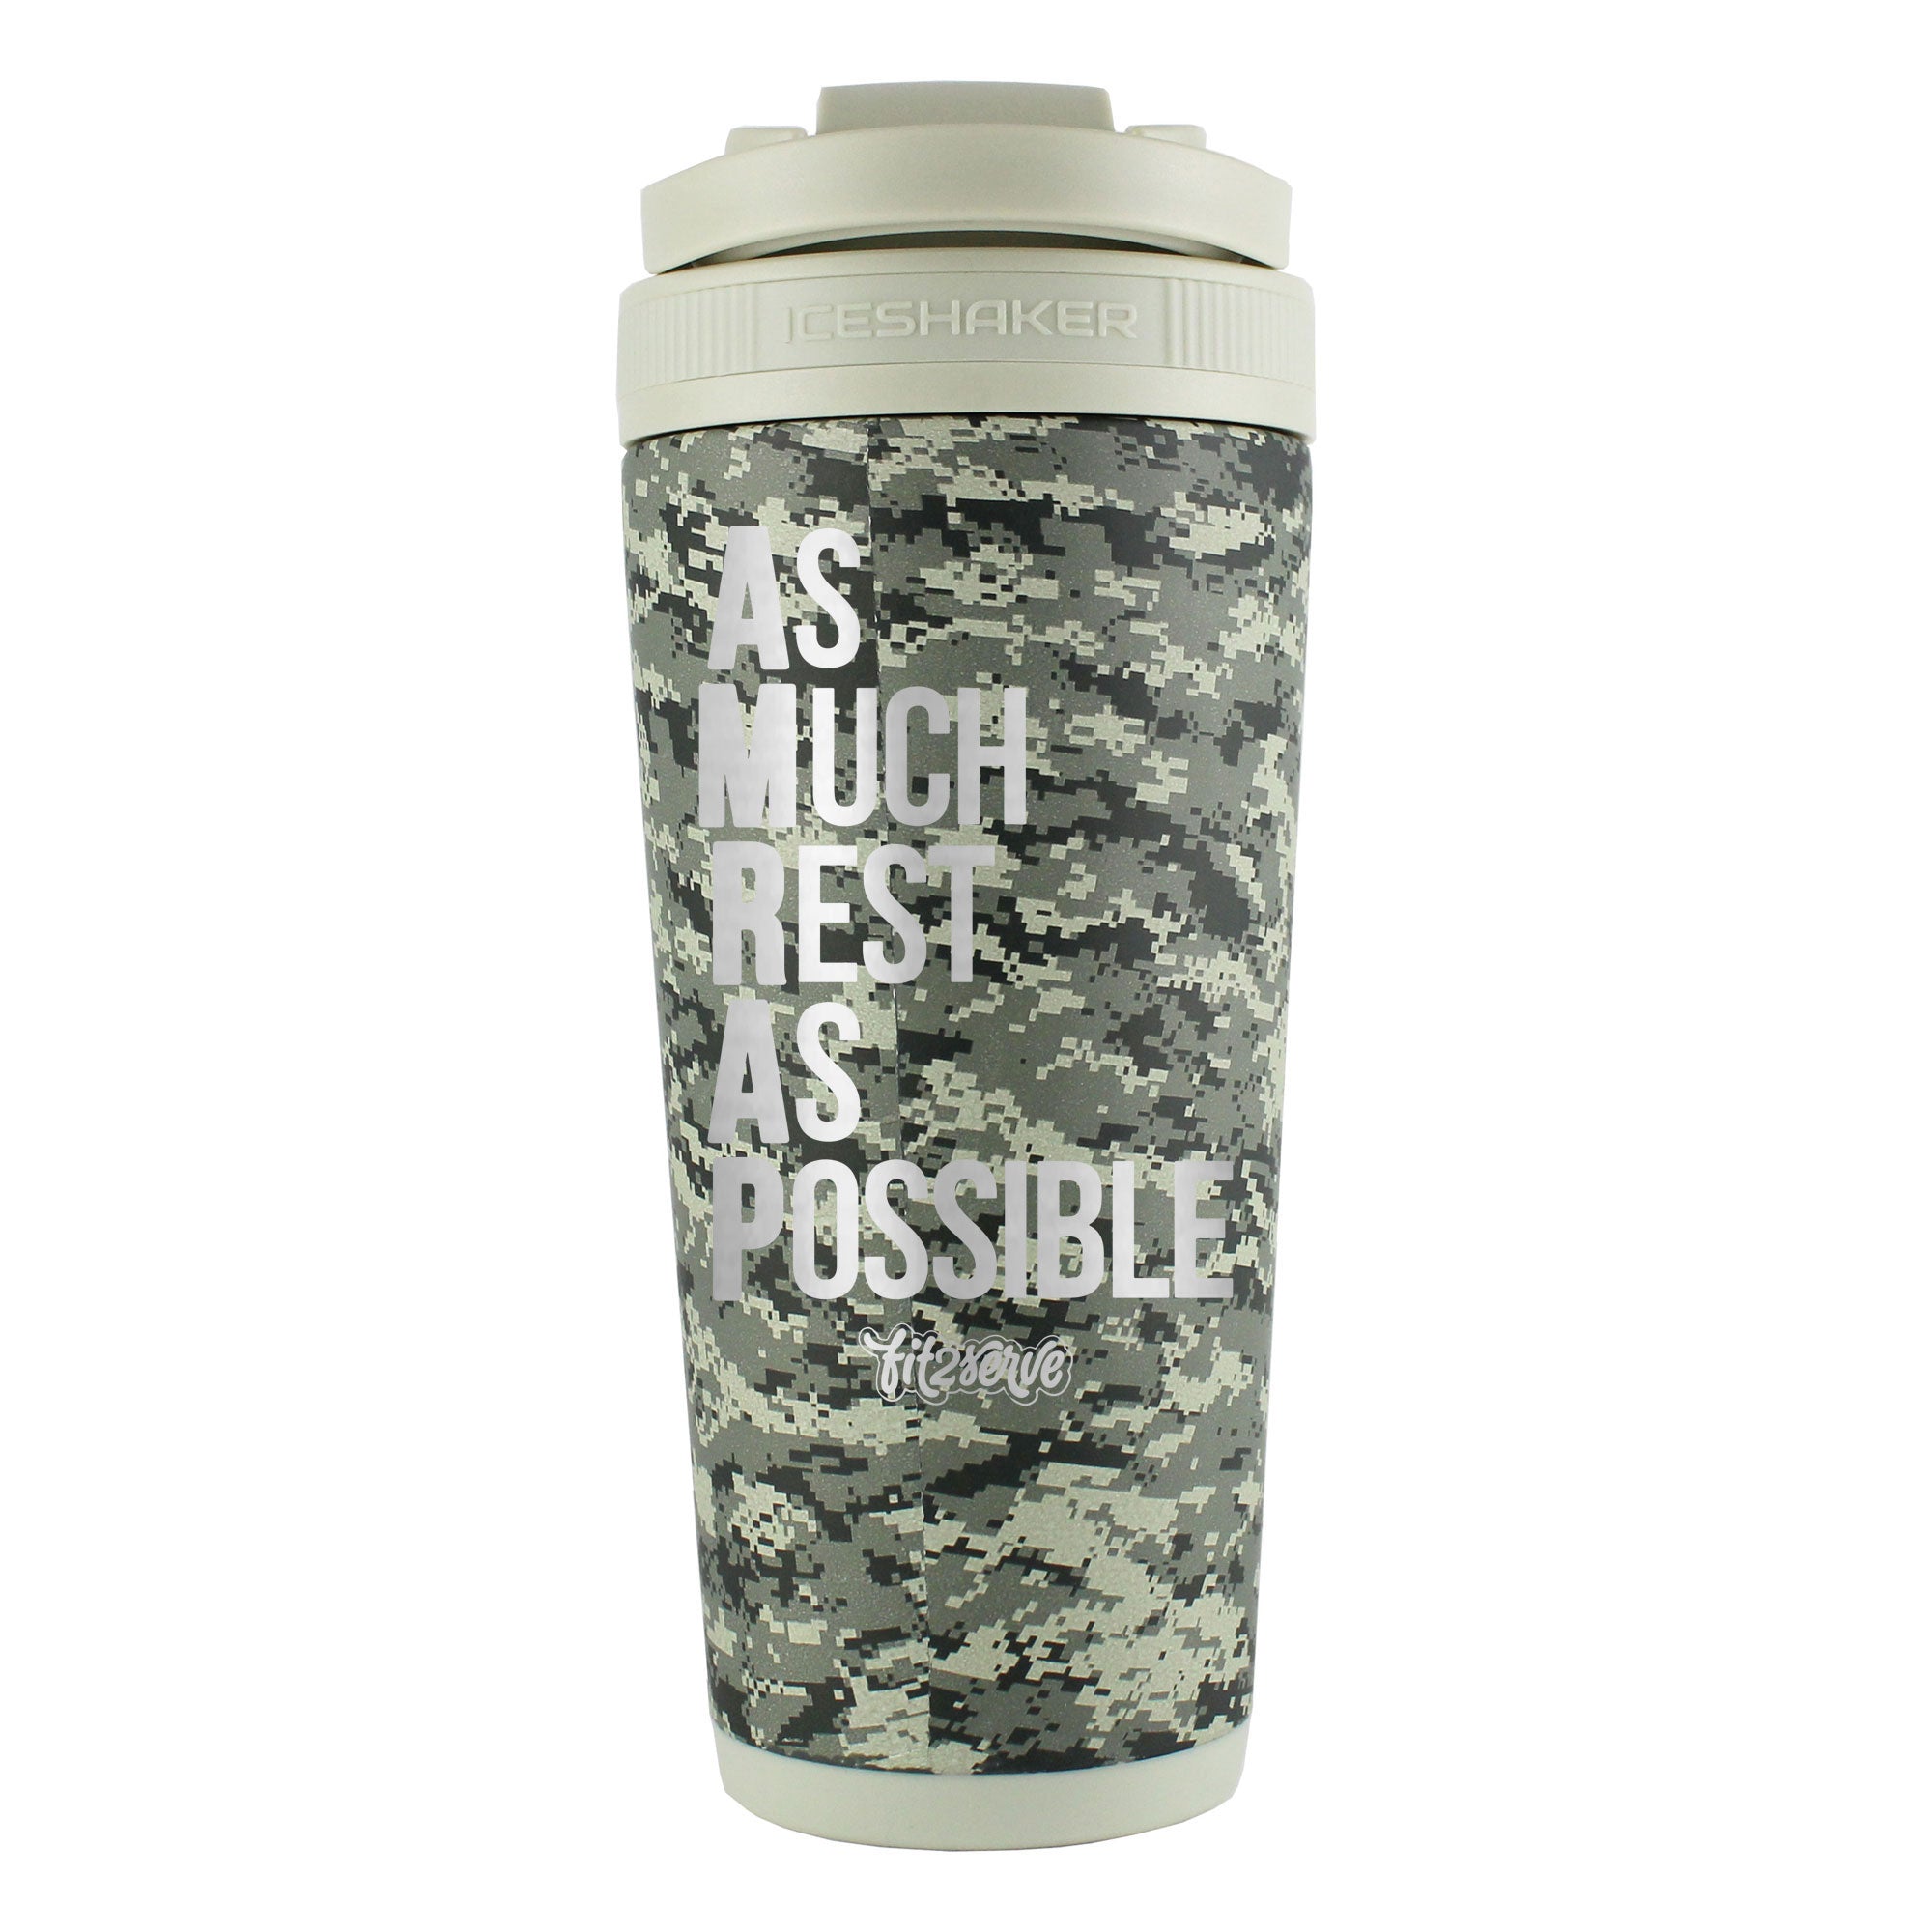 FIT2SERVE As Much Rest As Possible 26oz Ice Shaker - US Army Camo